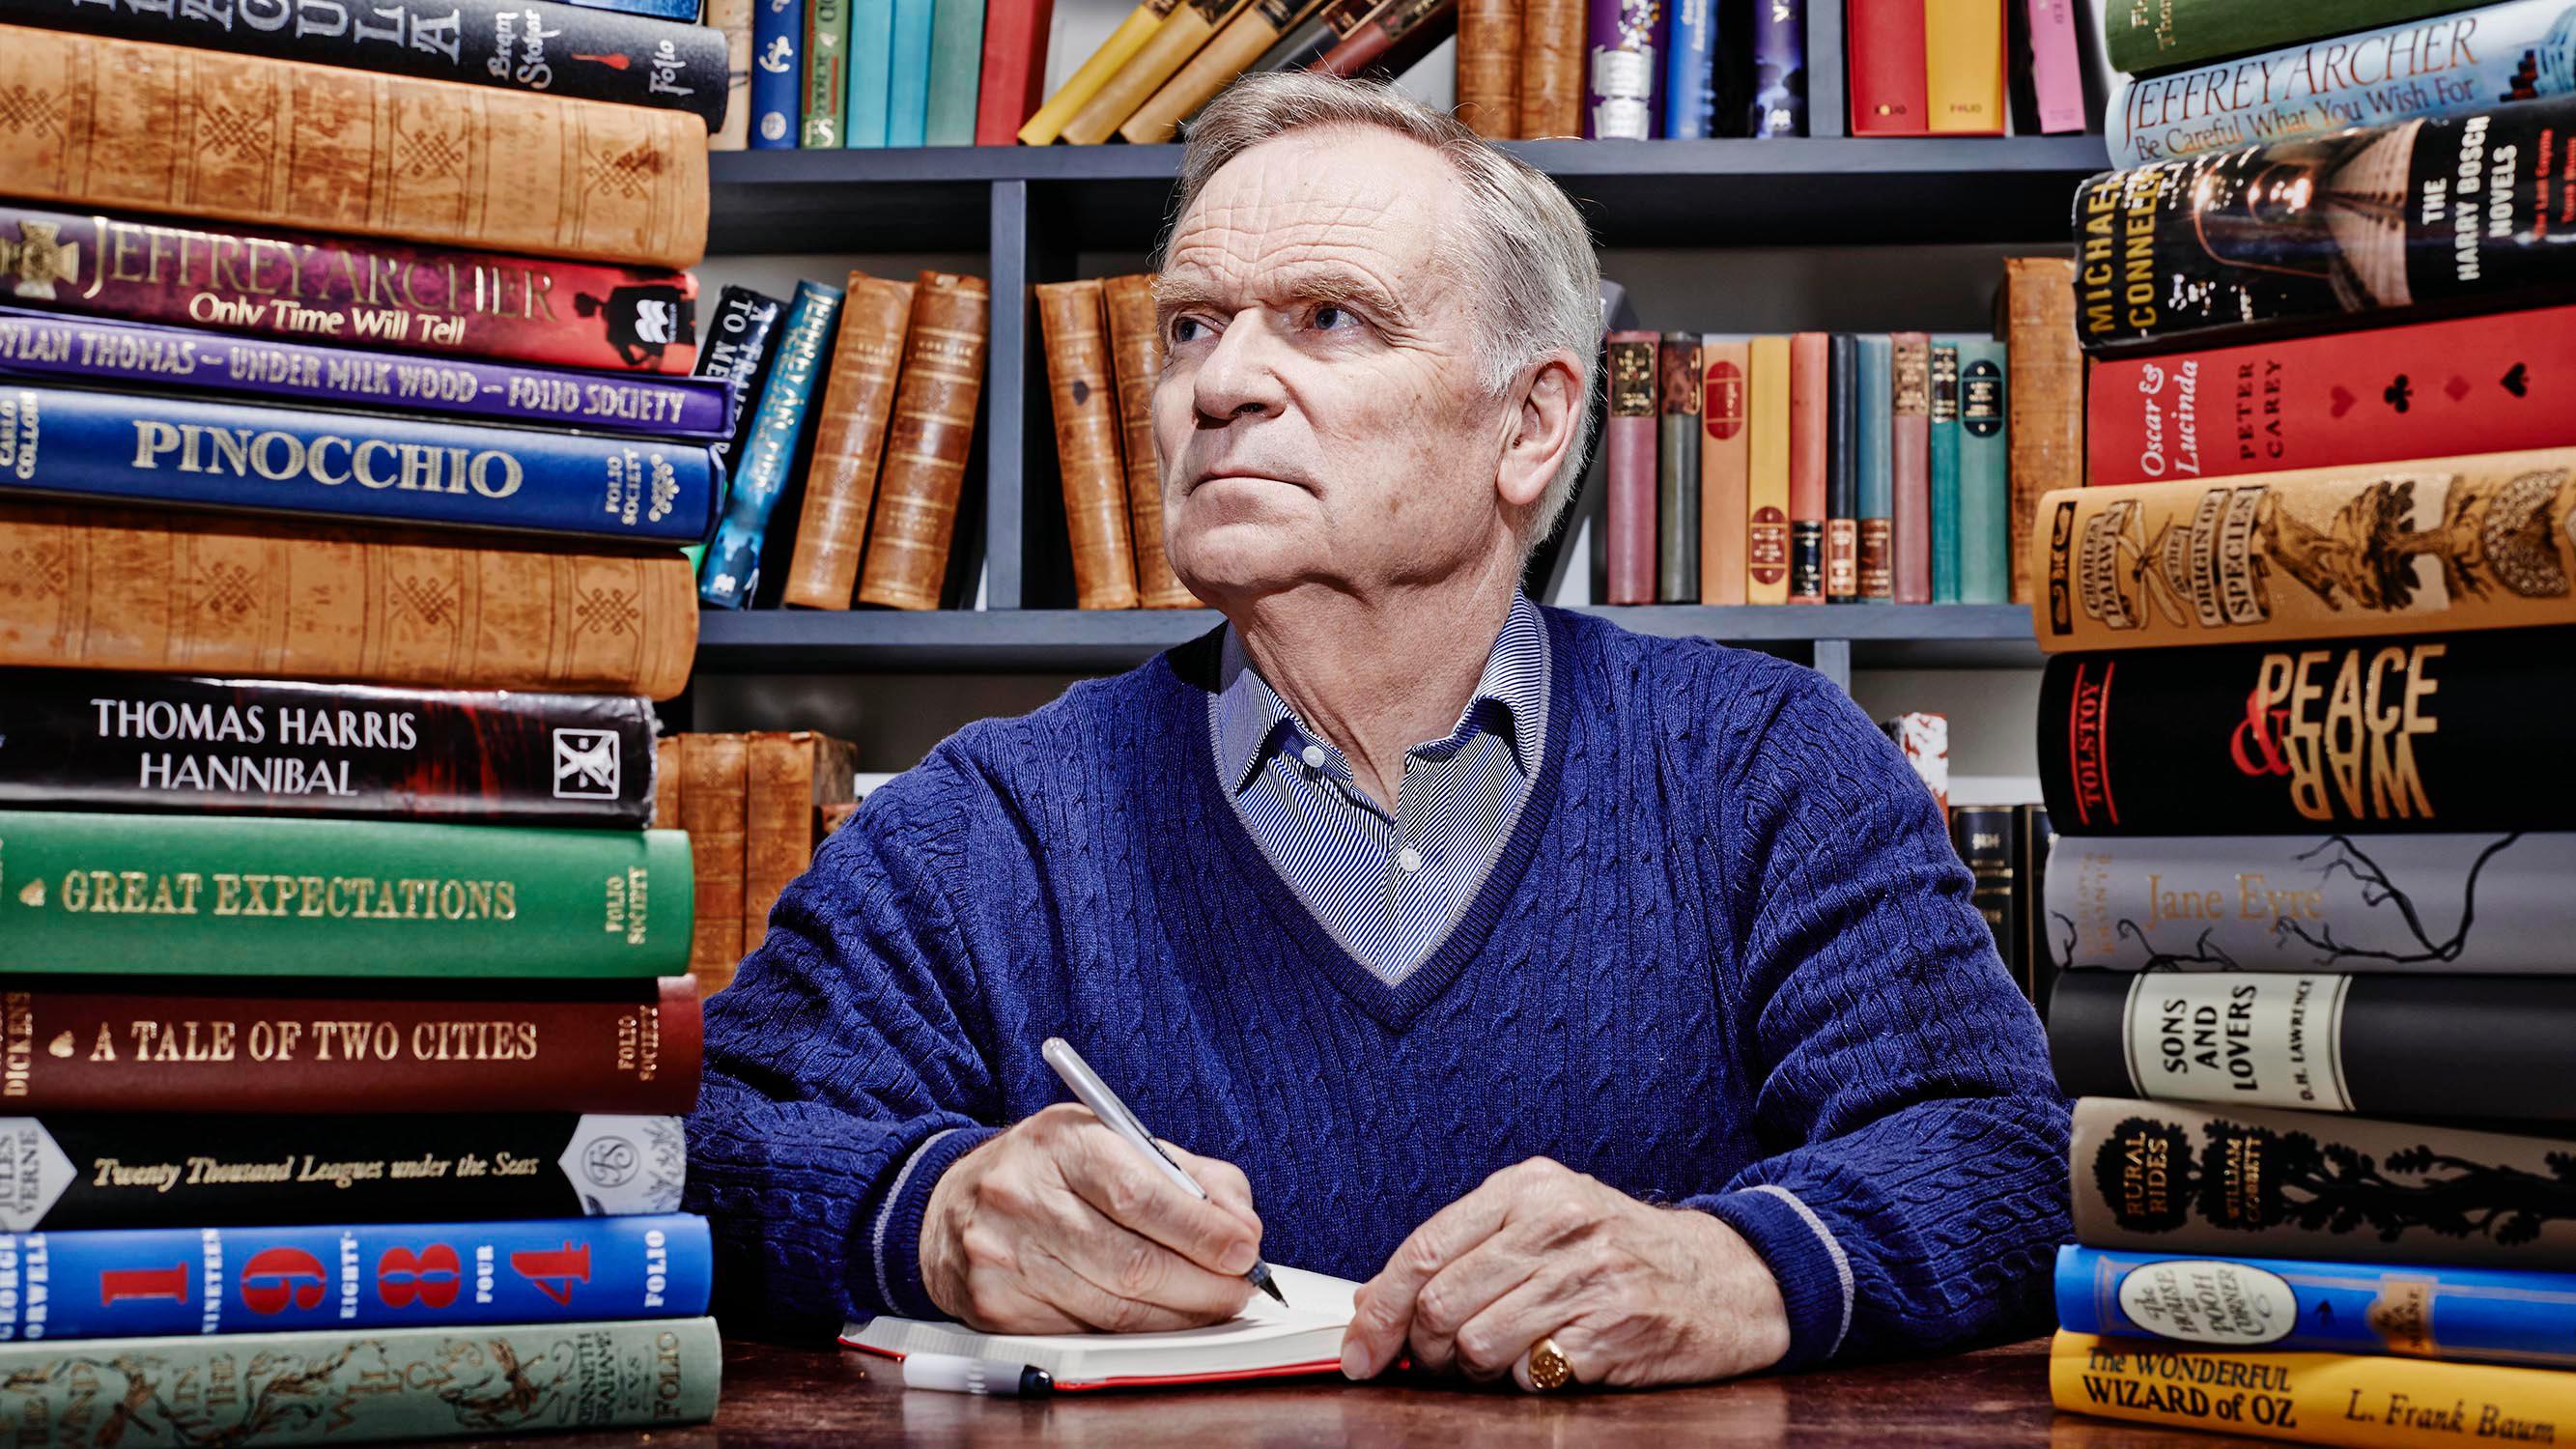 Jeffrey Archer wearing a blue sweater while holding a pen and notebook